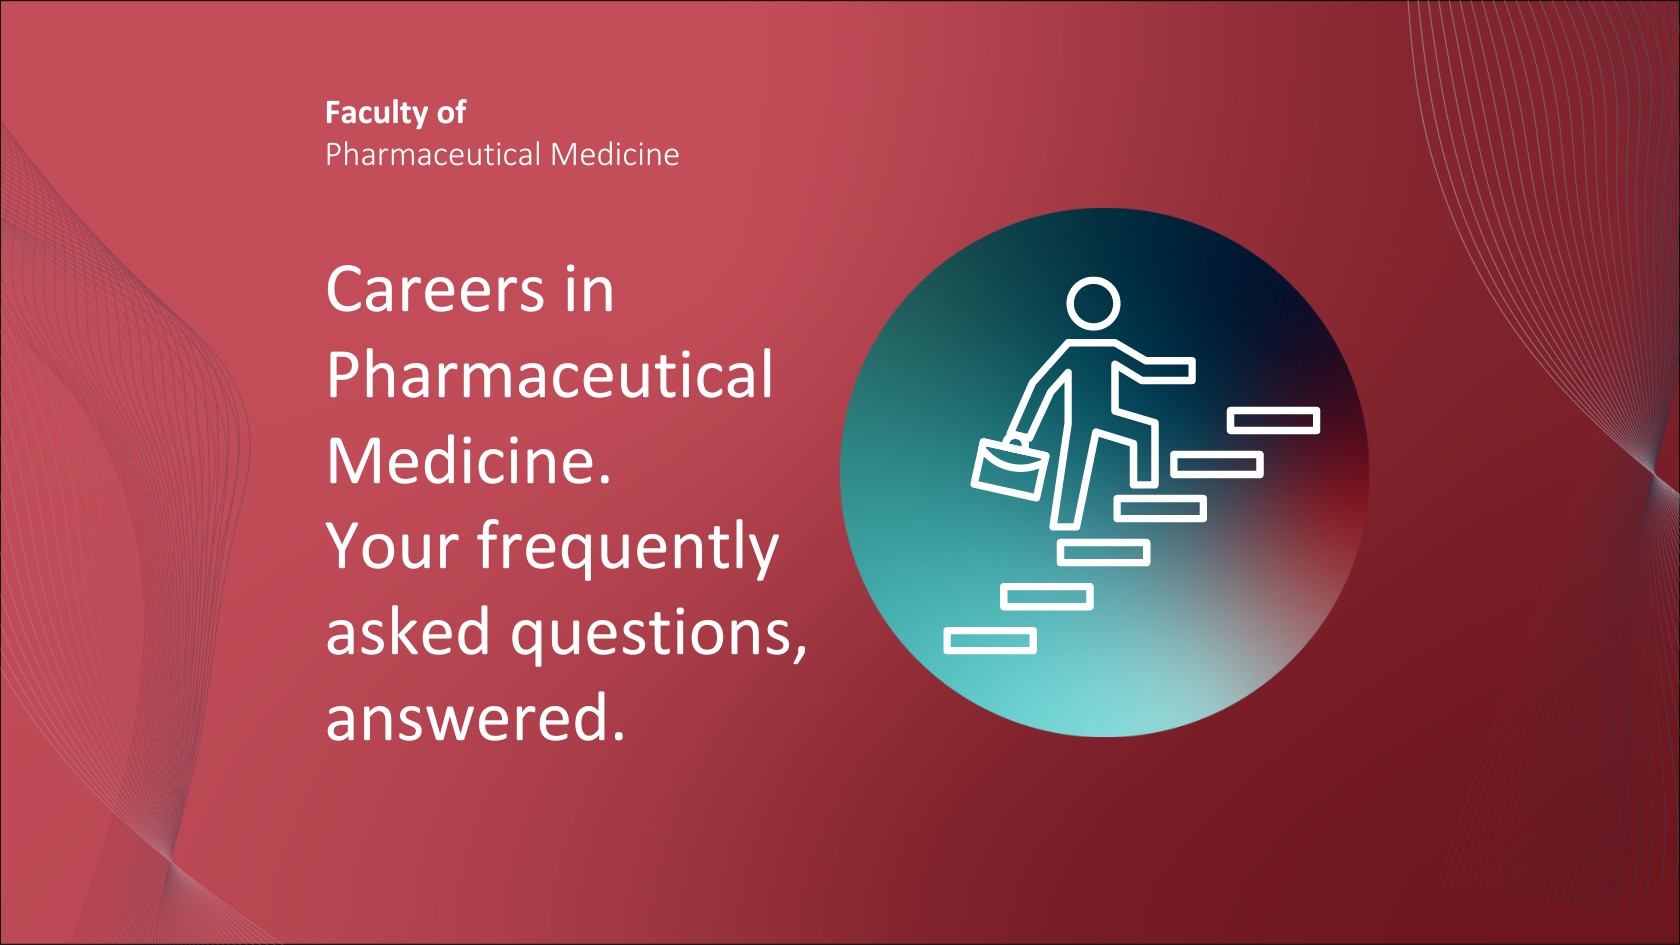 Careers in Pharmaceutical Medicine. Our frequently asked questions, answered. Graphic of someone climbing stairs. FPM logo.